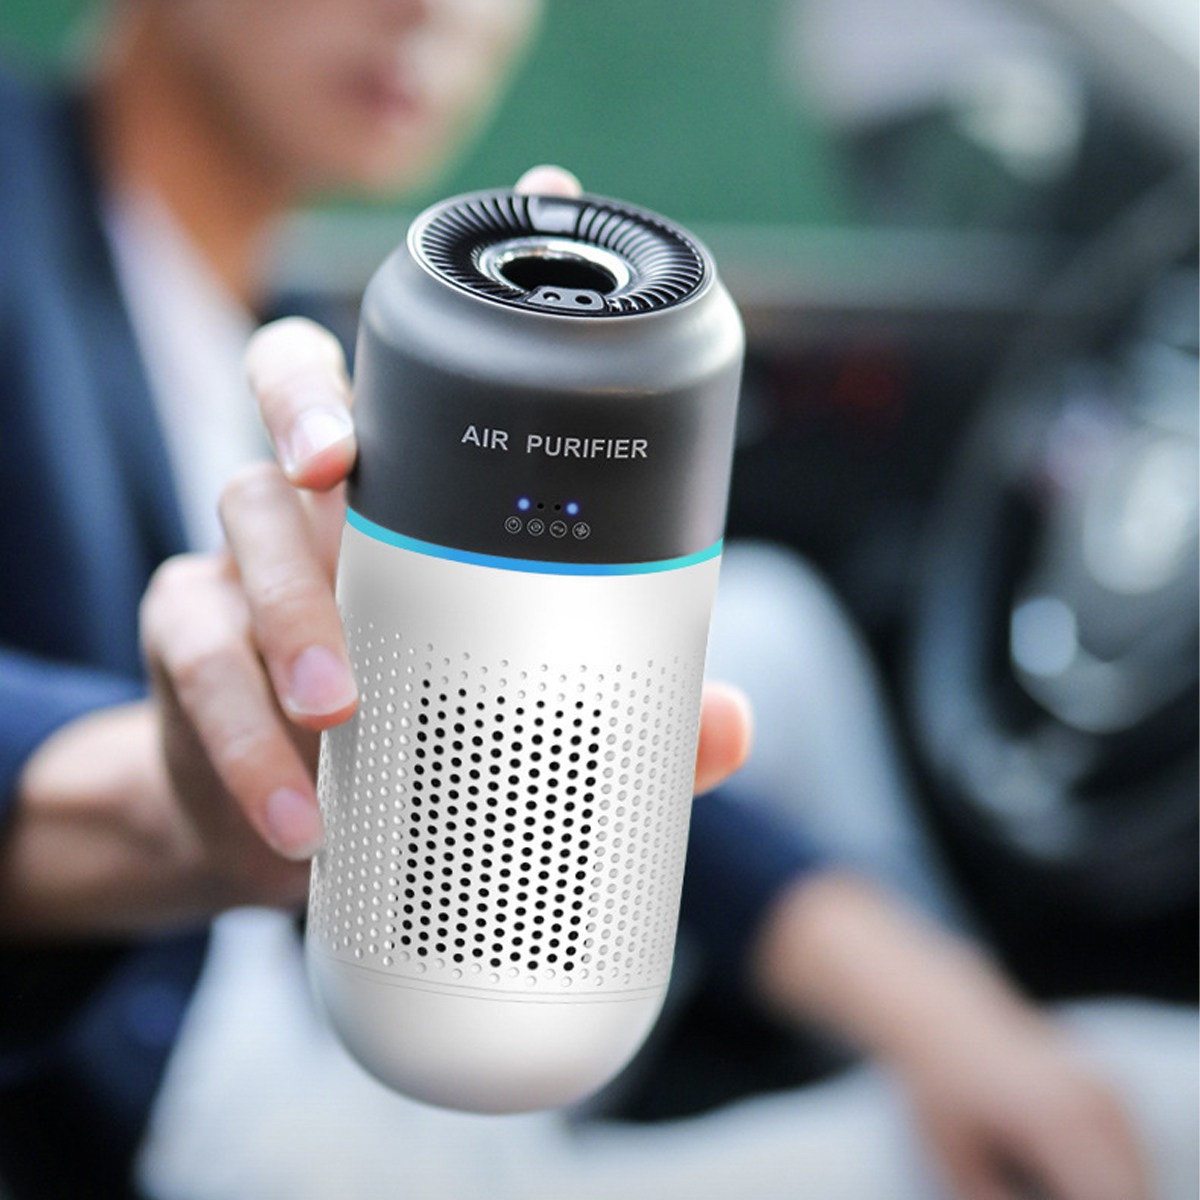 Mini-Air-Purifier-Double-layer-Filter-Purification-USB-Charging-Low-Noise-Removal-of-Formaldehyde-PM-1774239-8